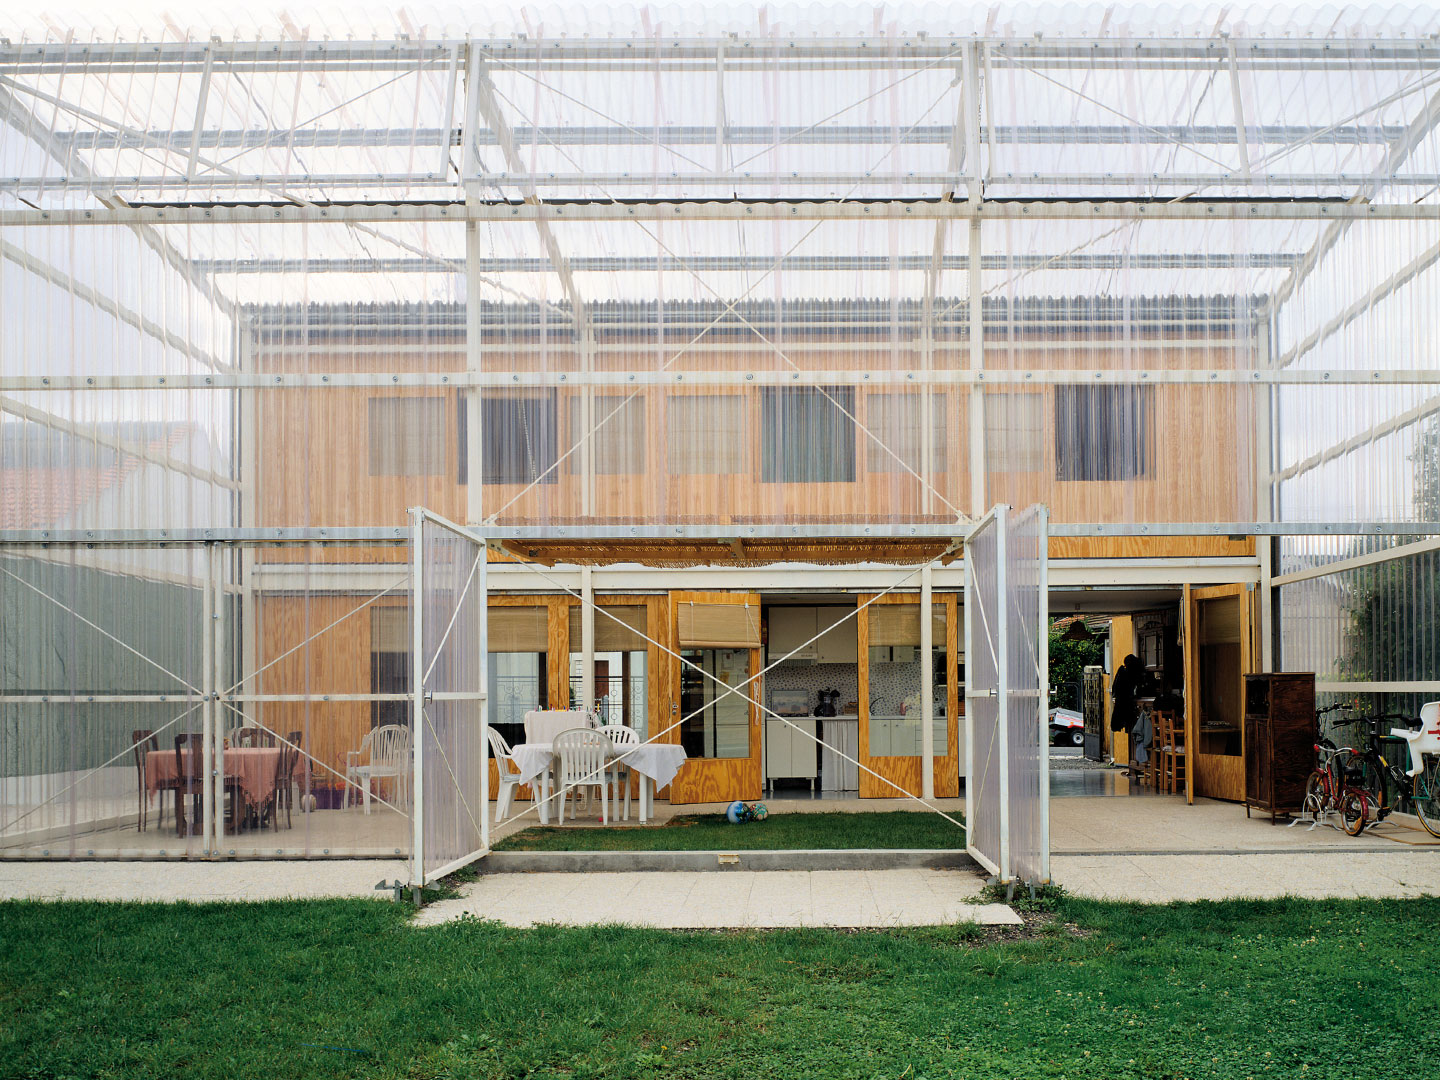 2021 Pritzker Prize awarded to Anne Lacaton and Jean-Philippe Vassal